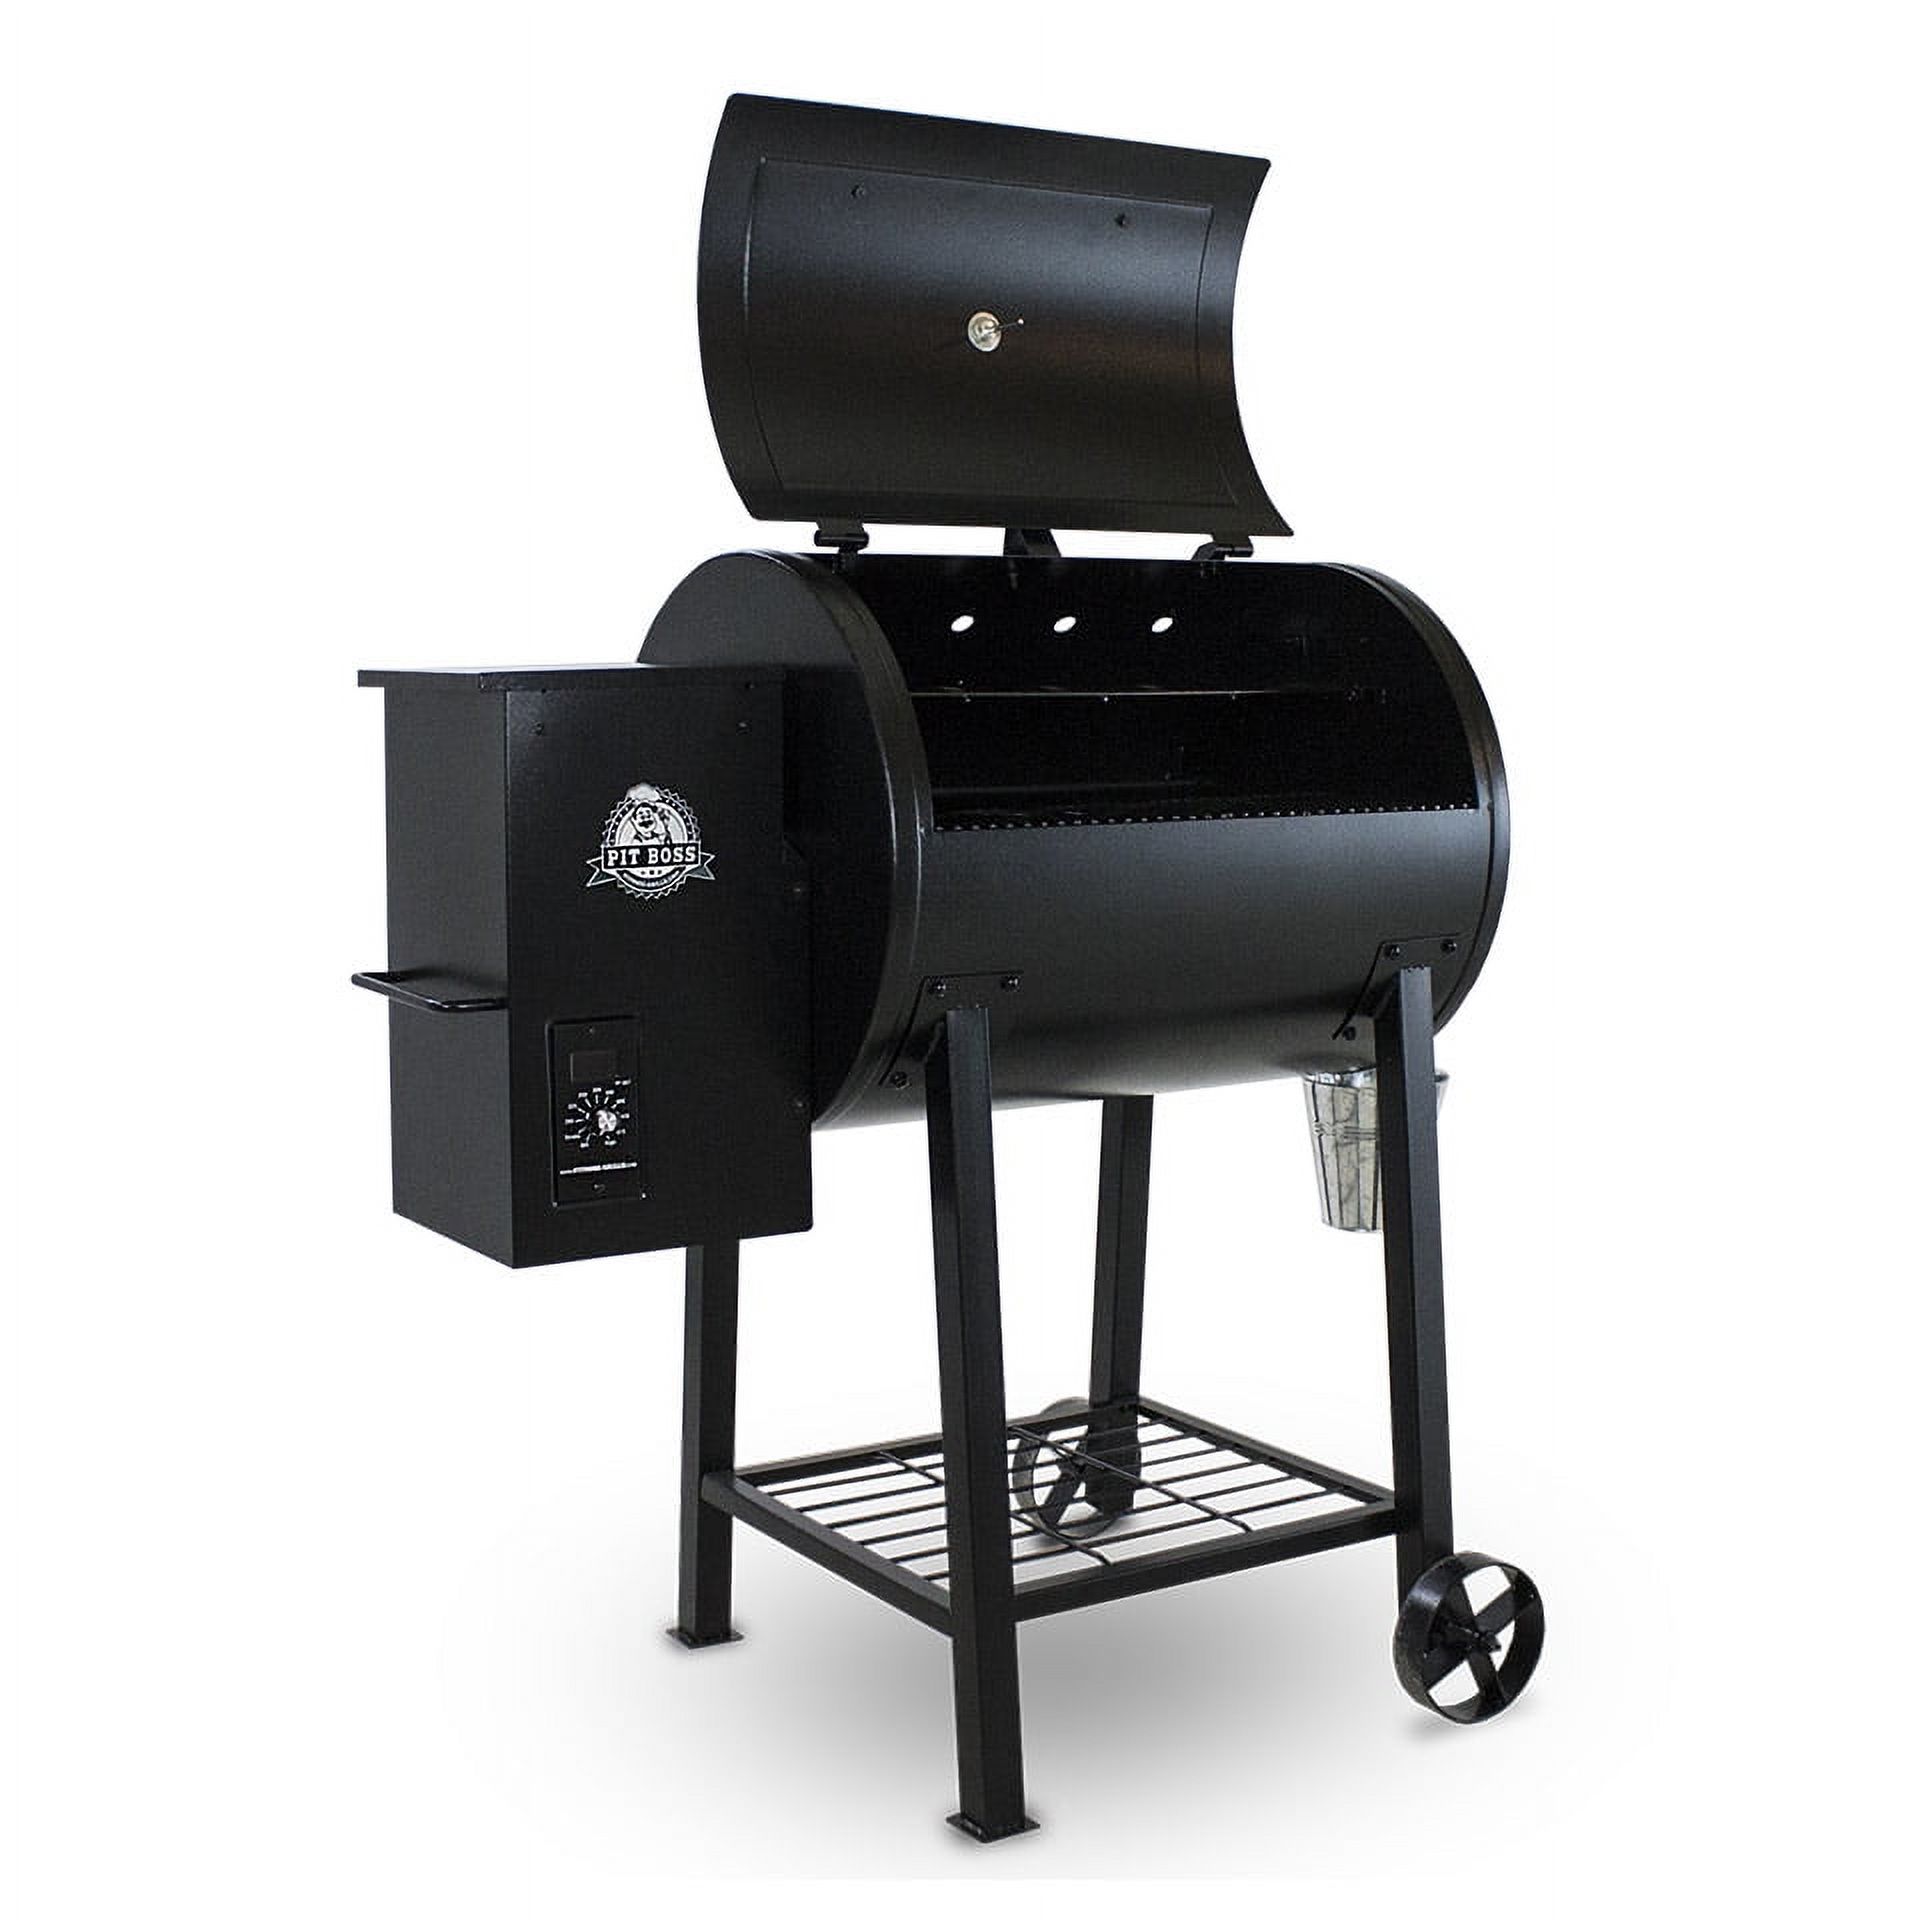 Pit Boss 700FB Wood Fired Pellet Grill with Flame Broiler, 700 Sq. In. Cooking Space - image 3 of 11